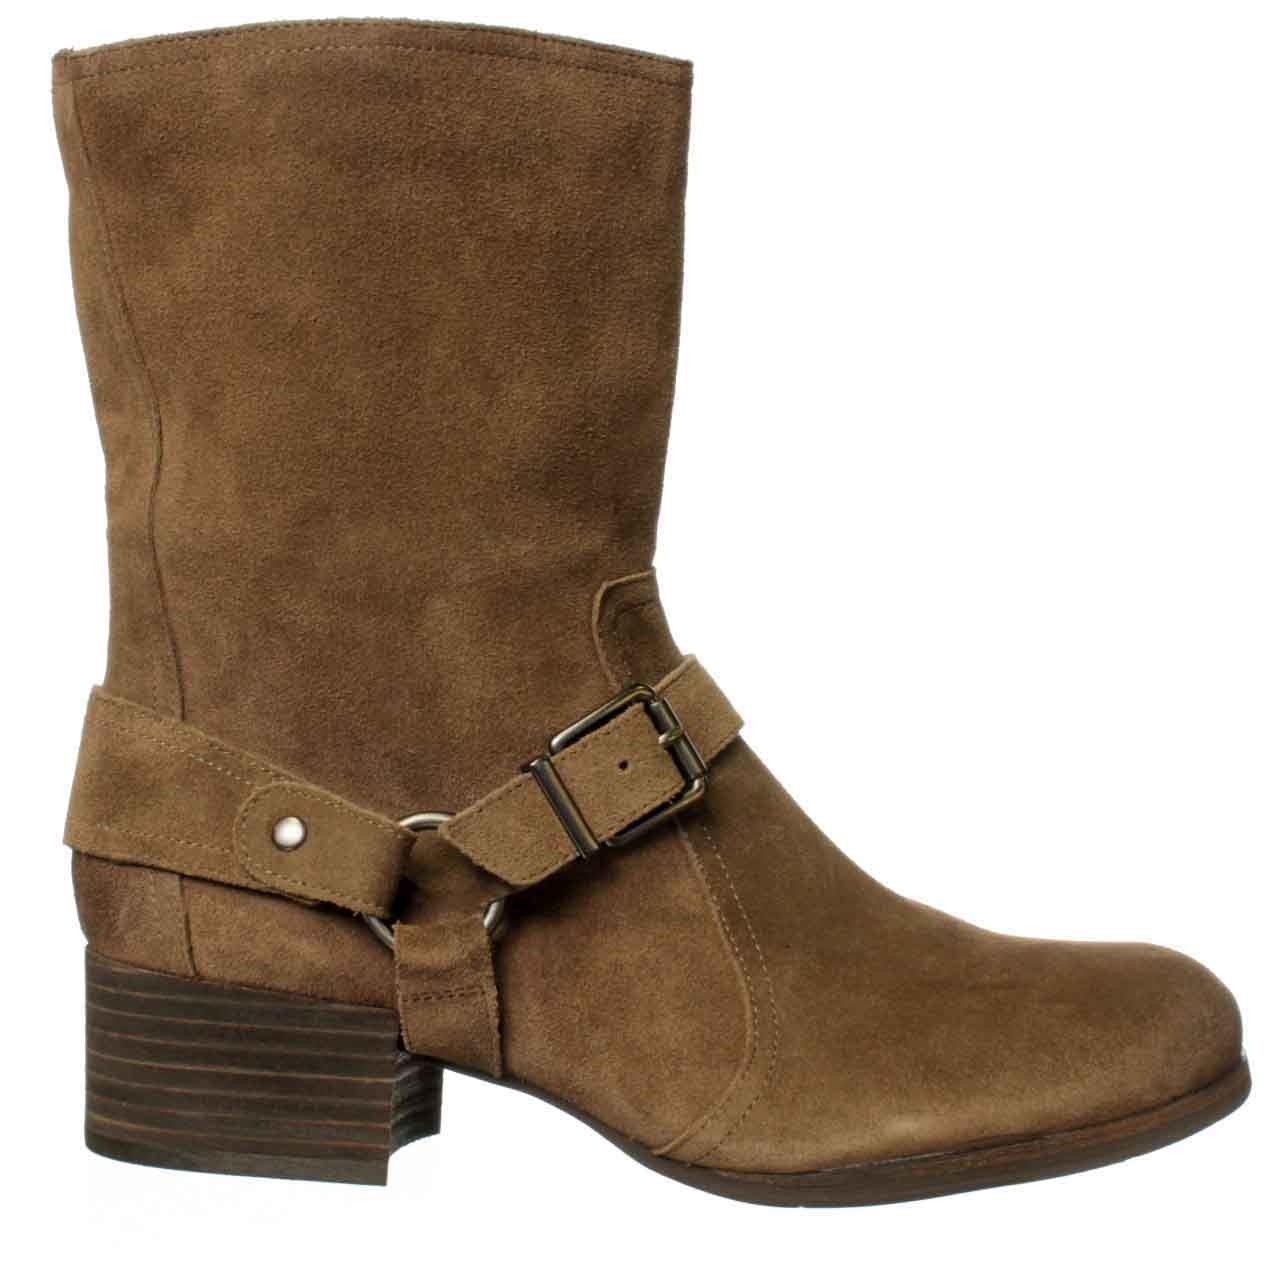 Jessica simpson Annine Ankle Bootie in Brown | Lyst1280 x 1280